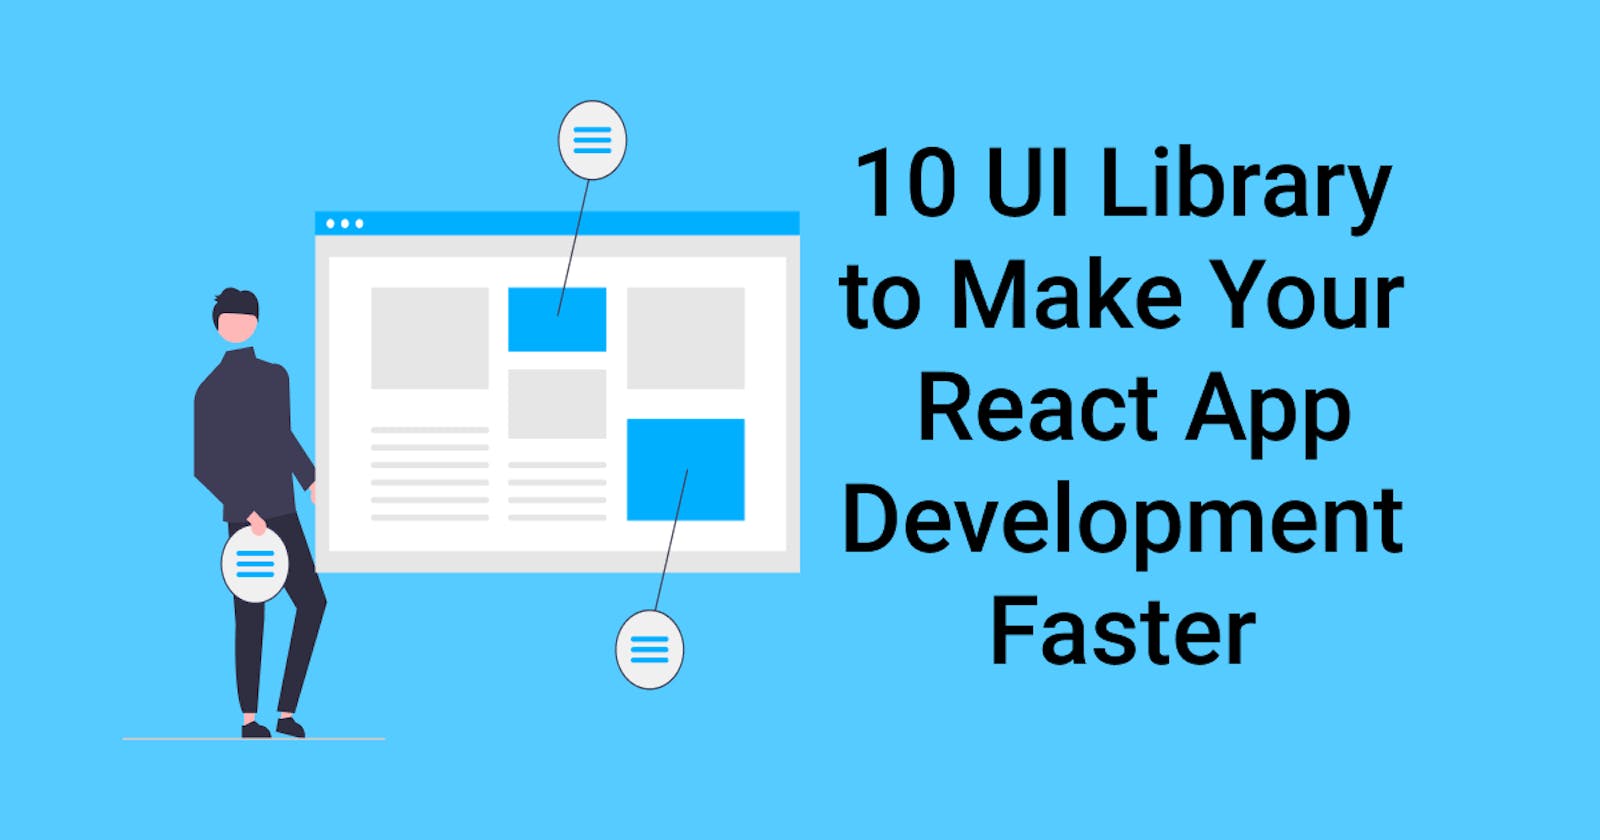 10 UI Library to Make Your React App Development Faster